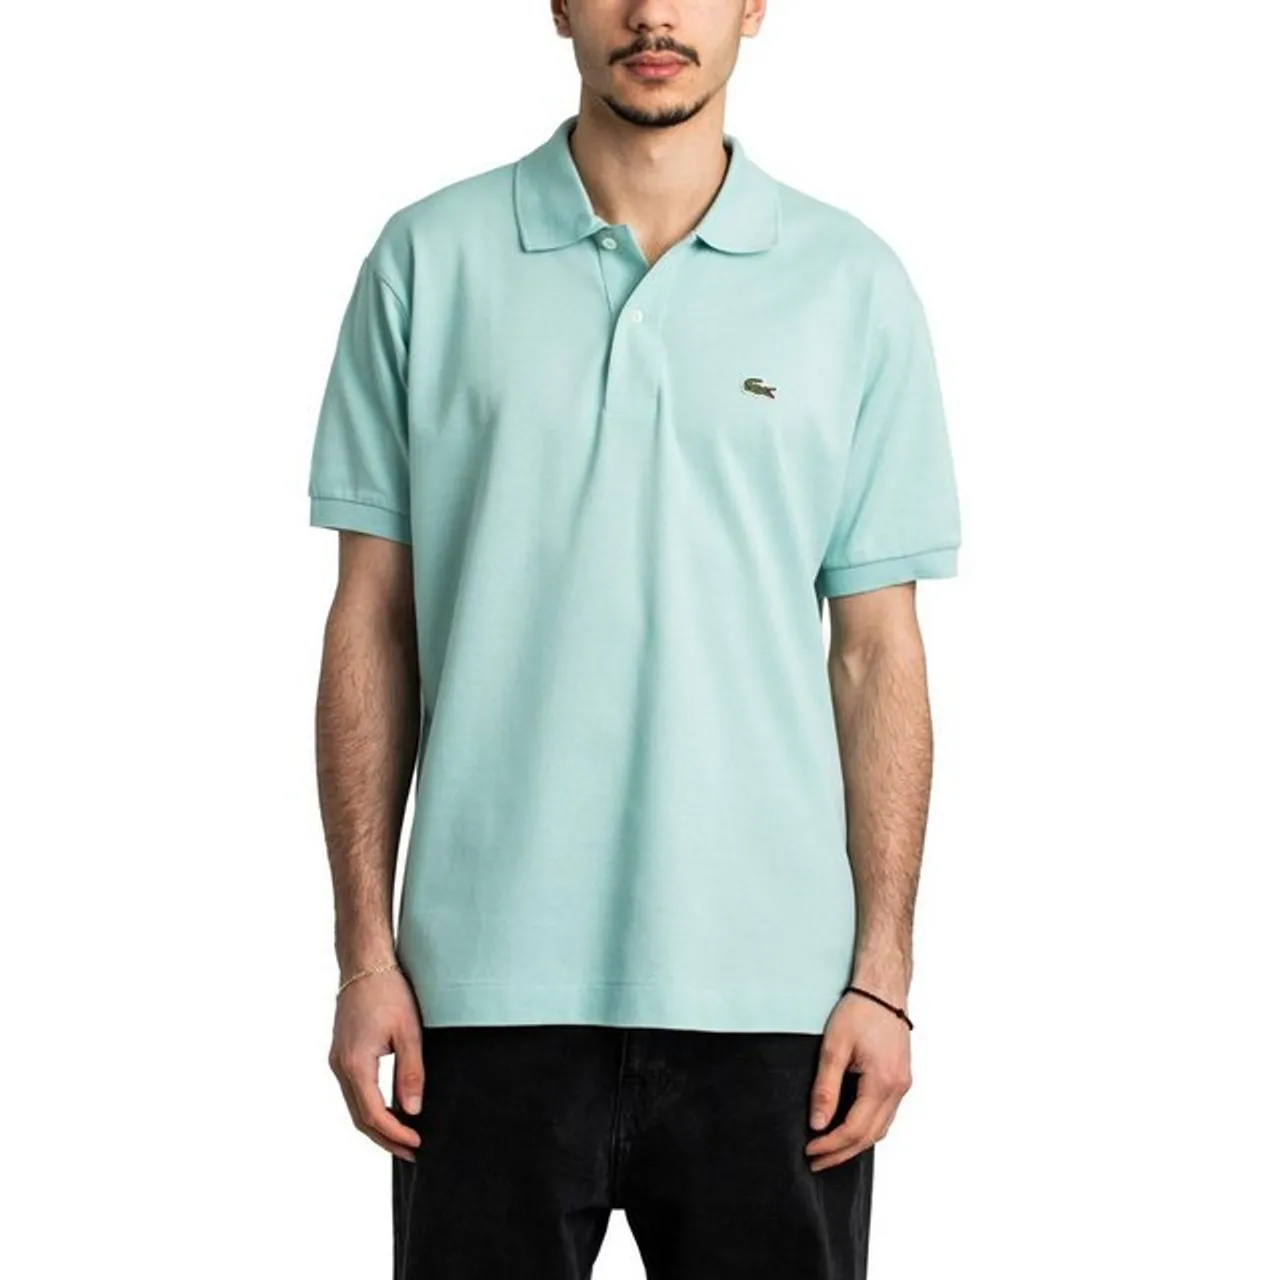 Lacoste Poloshirt Lacoste Classic Fit Poloshirt